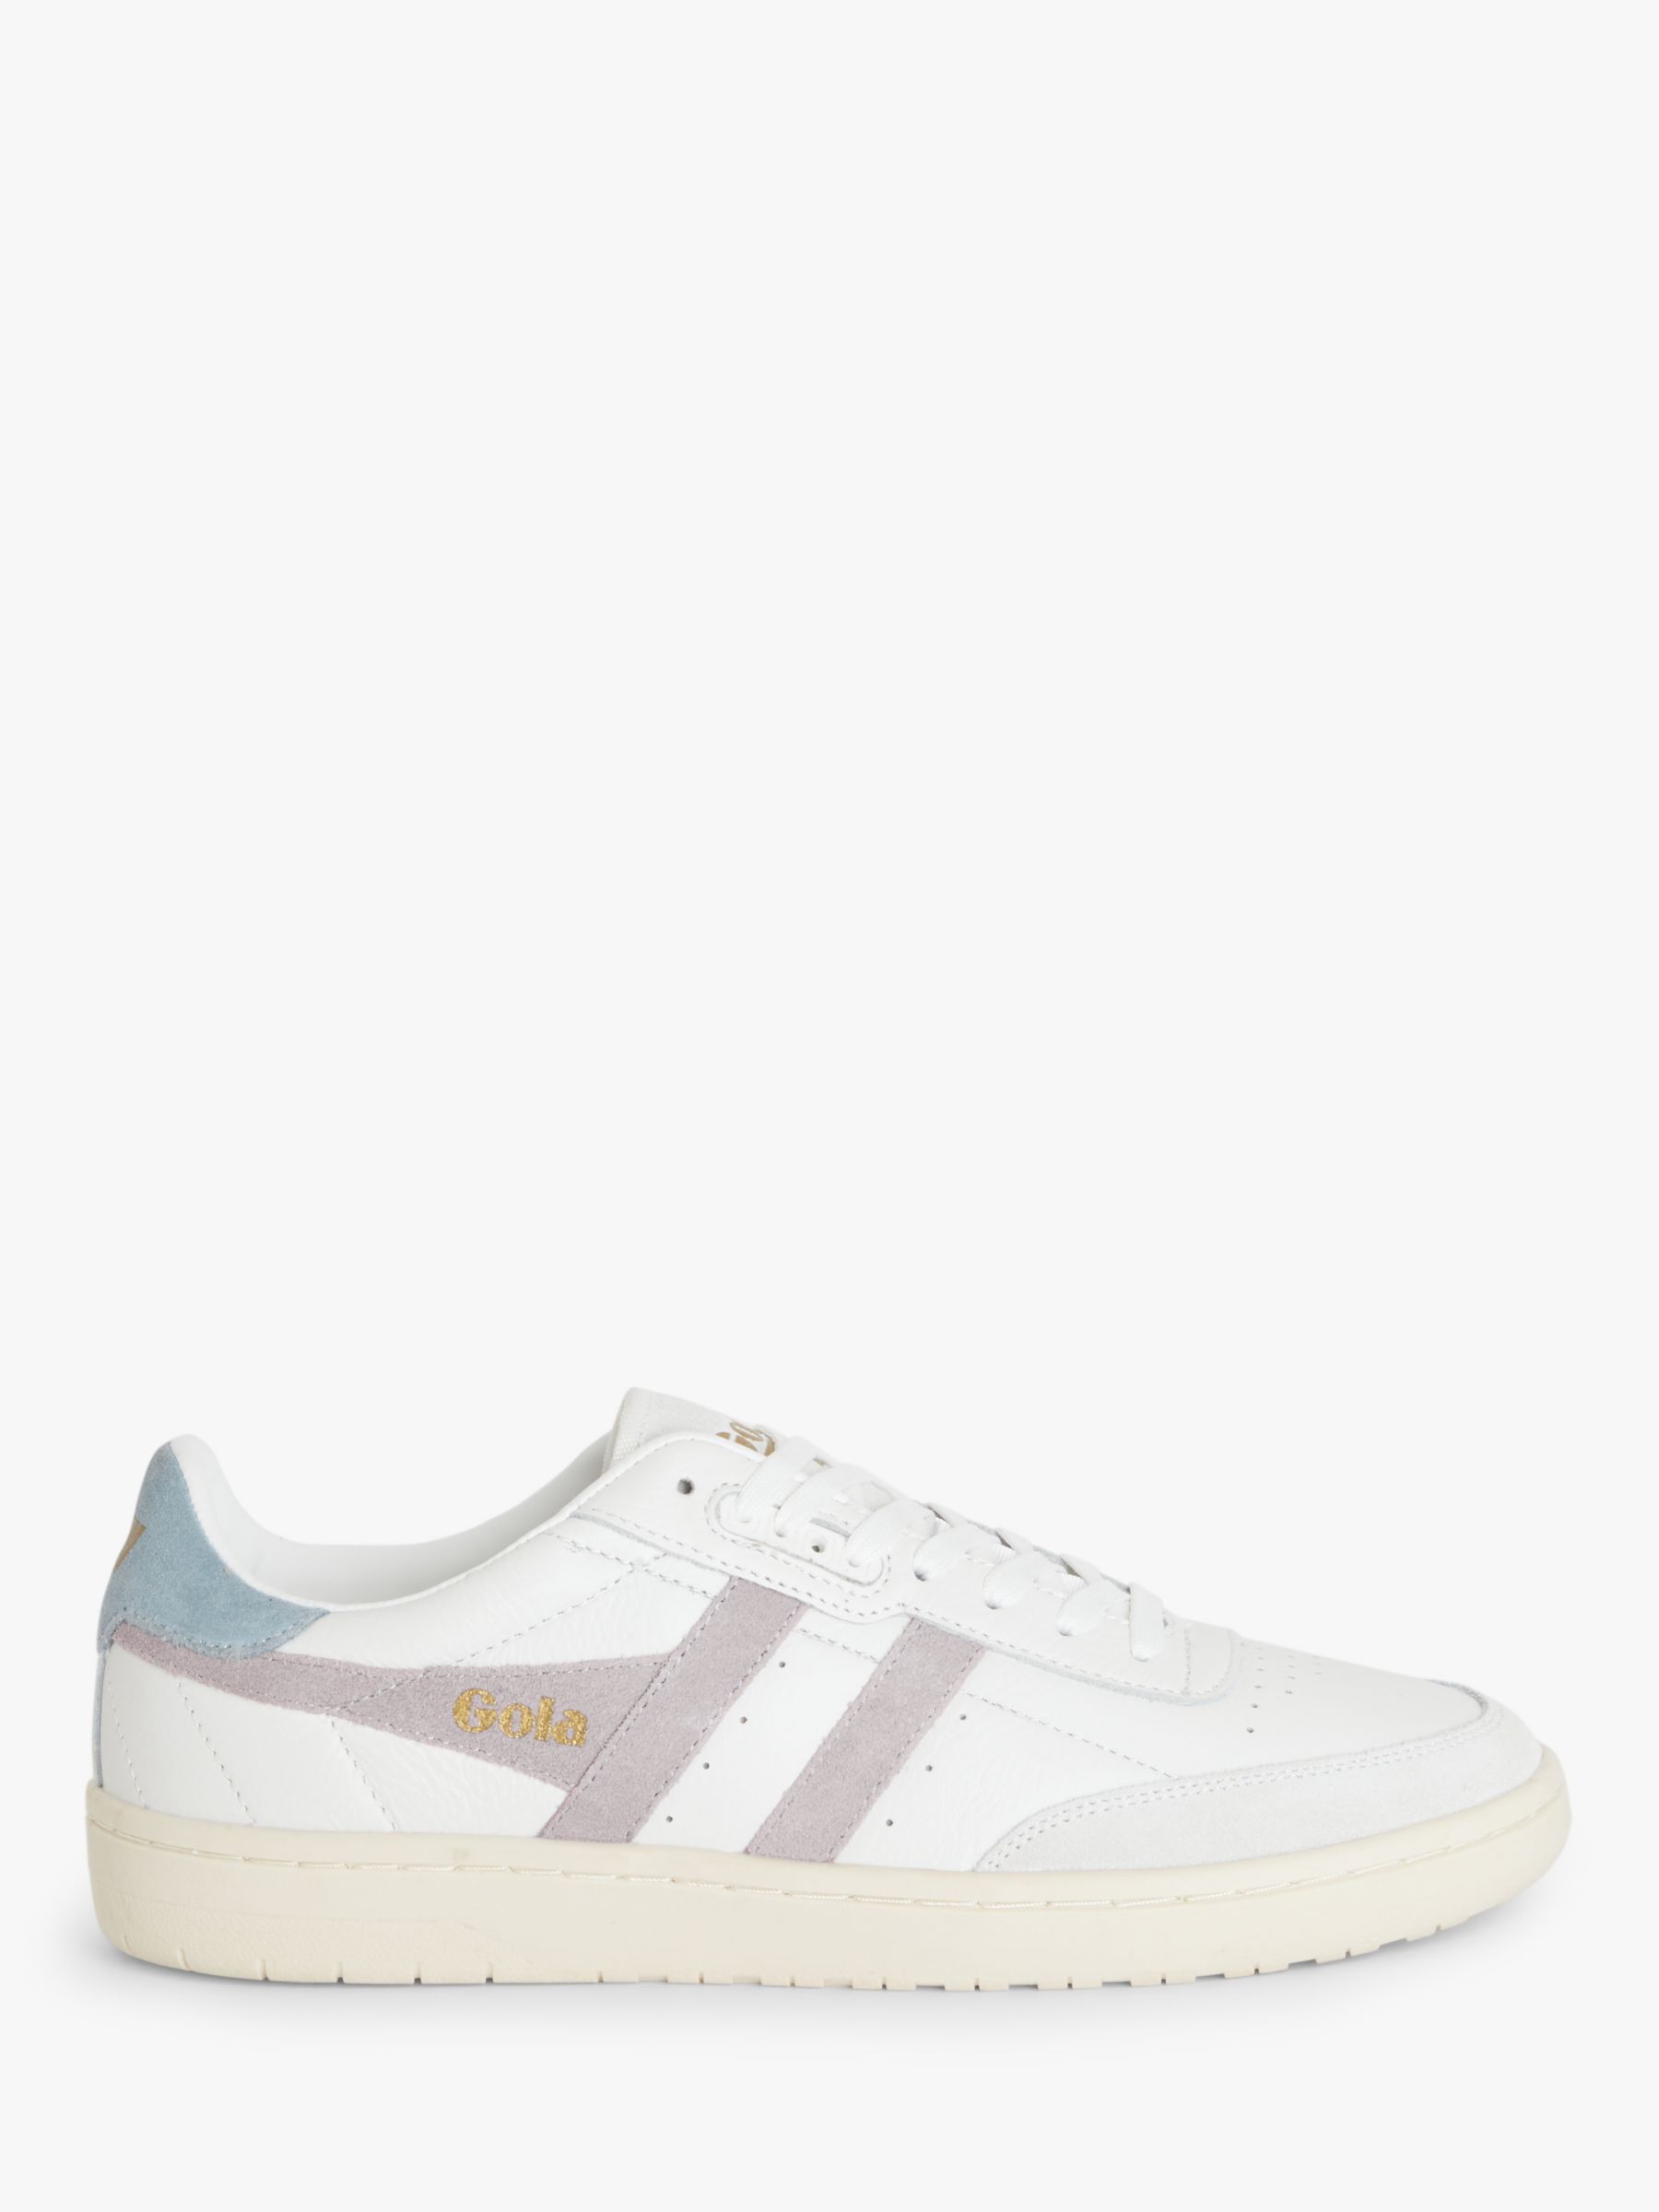 Gola Falcon Leather Trainers, White/Lily at John Lewis & Partners